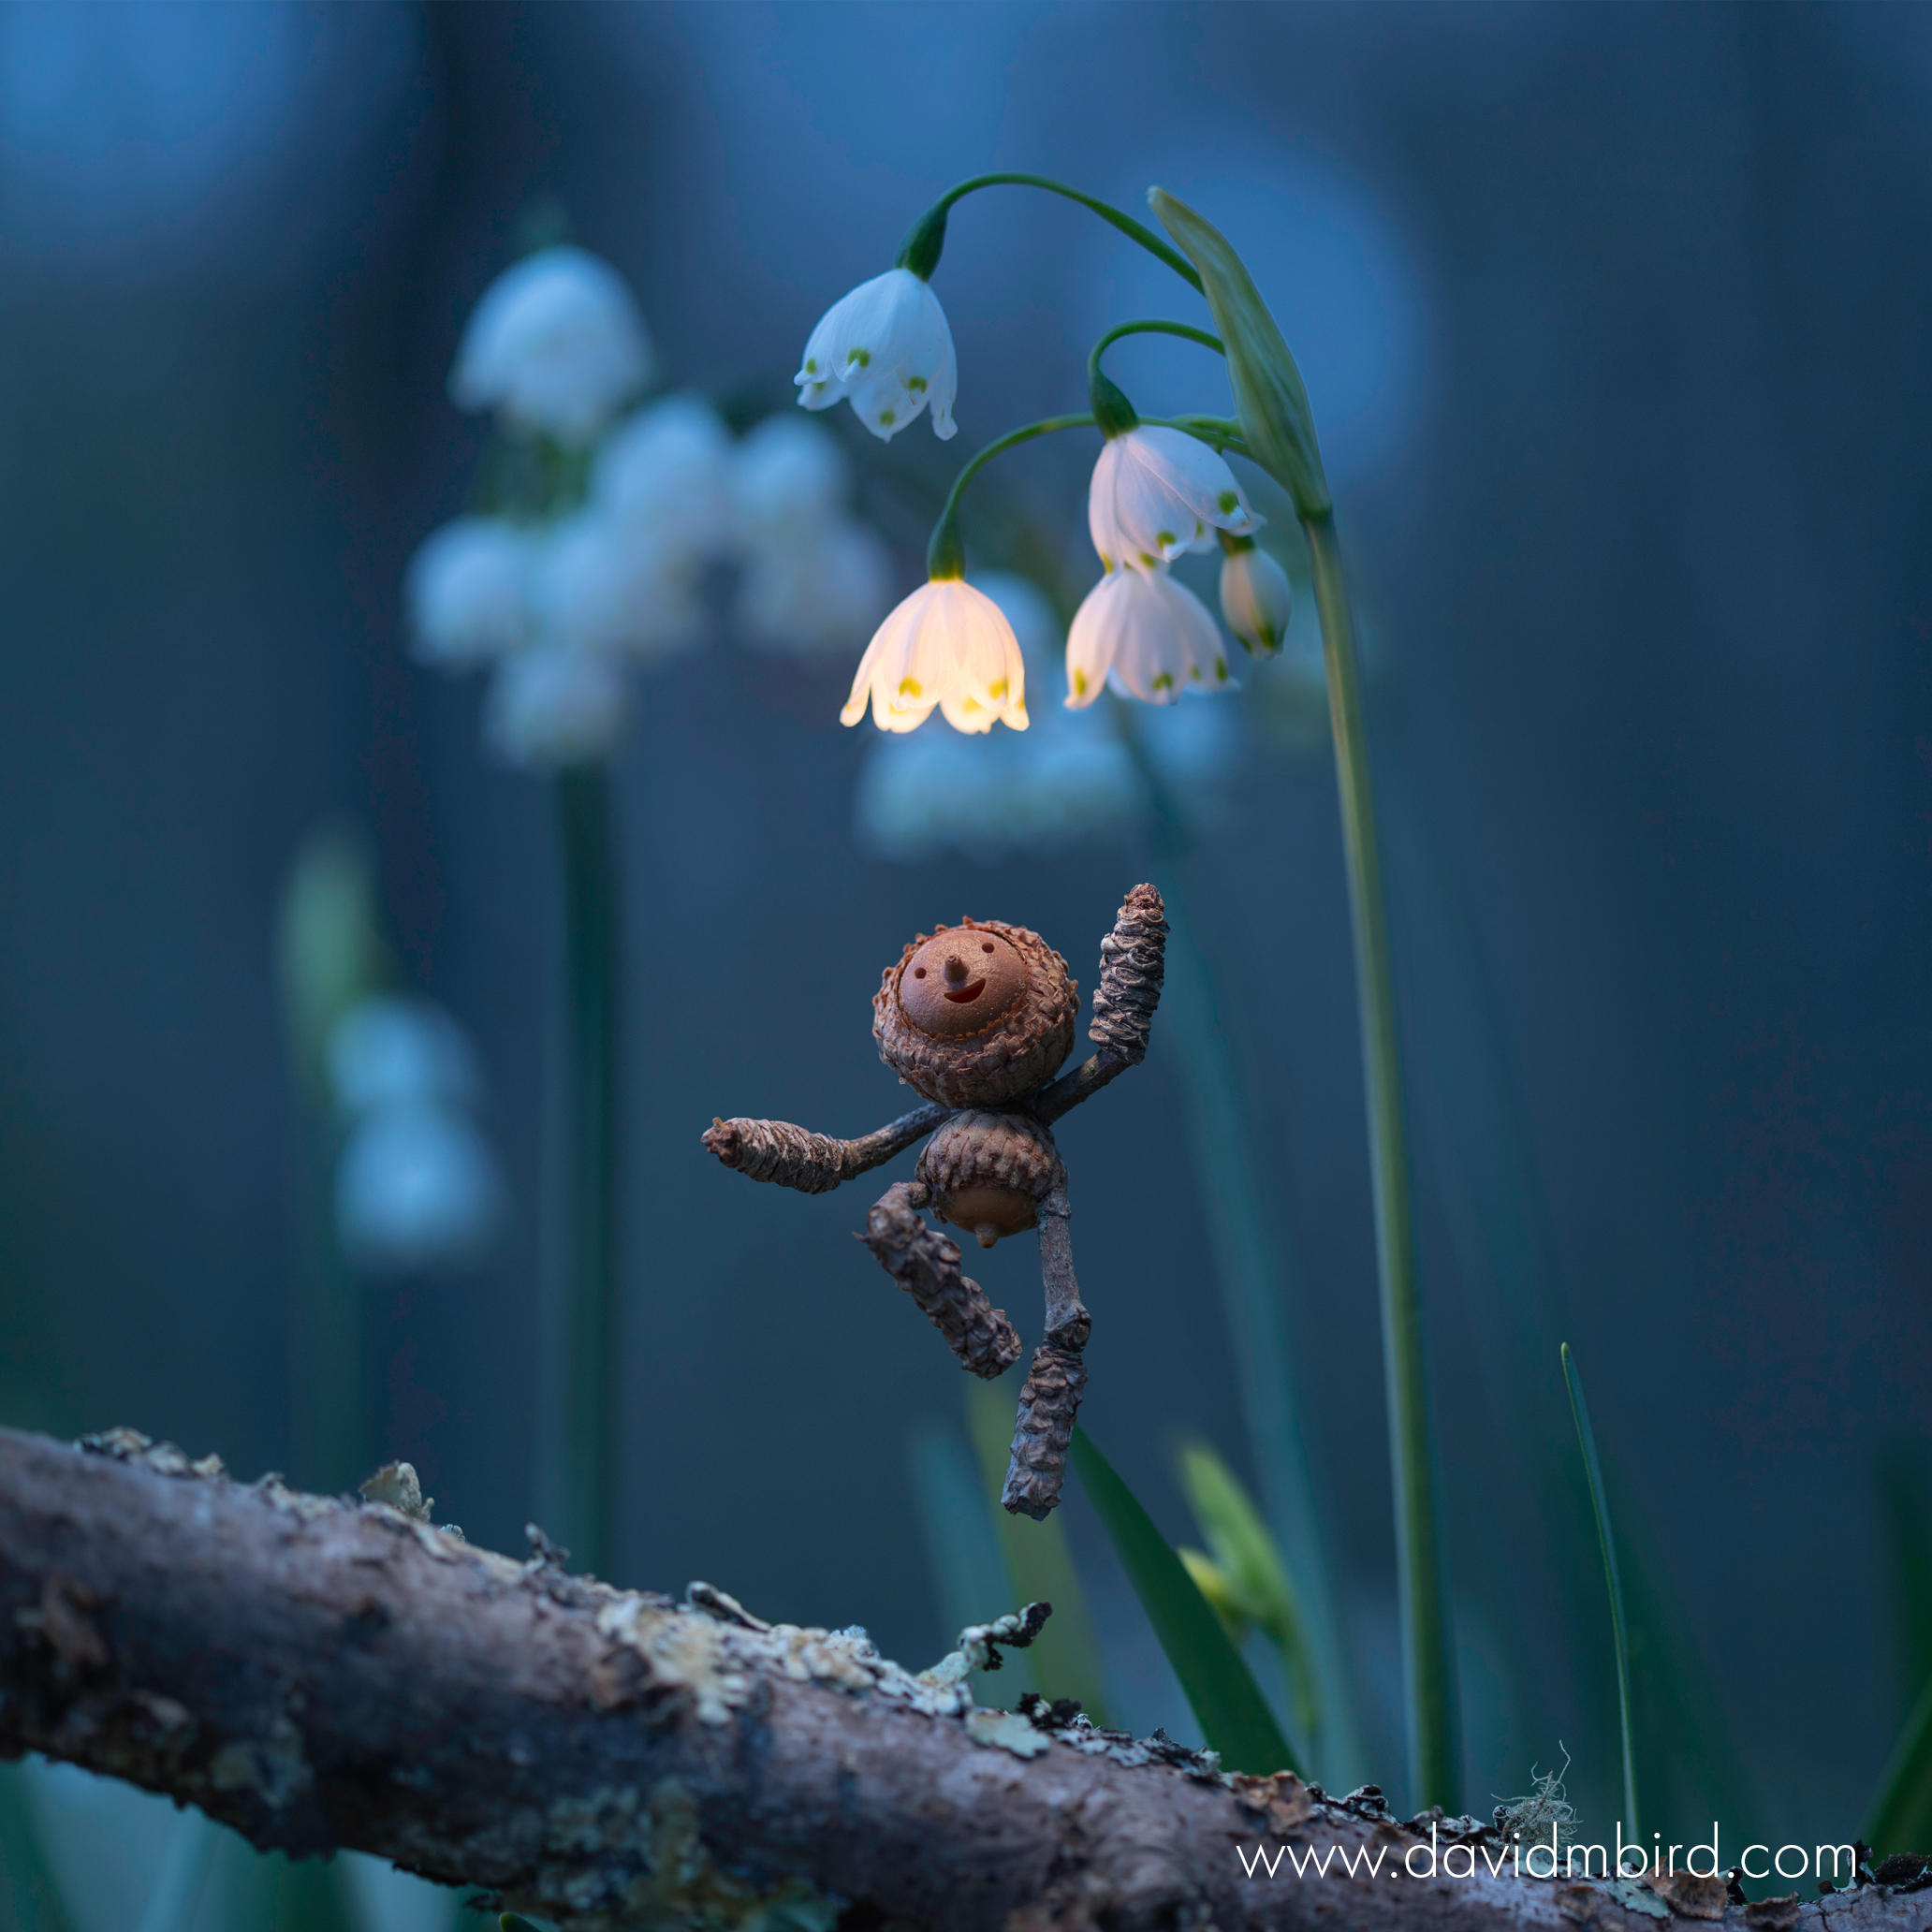 Decorative image of small person made from acorns dancing under lighted flower lamps 